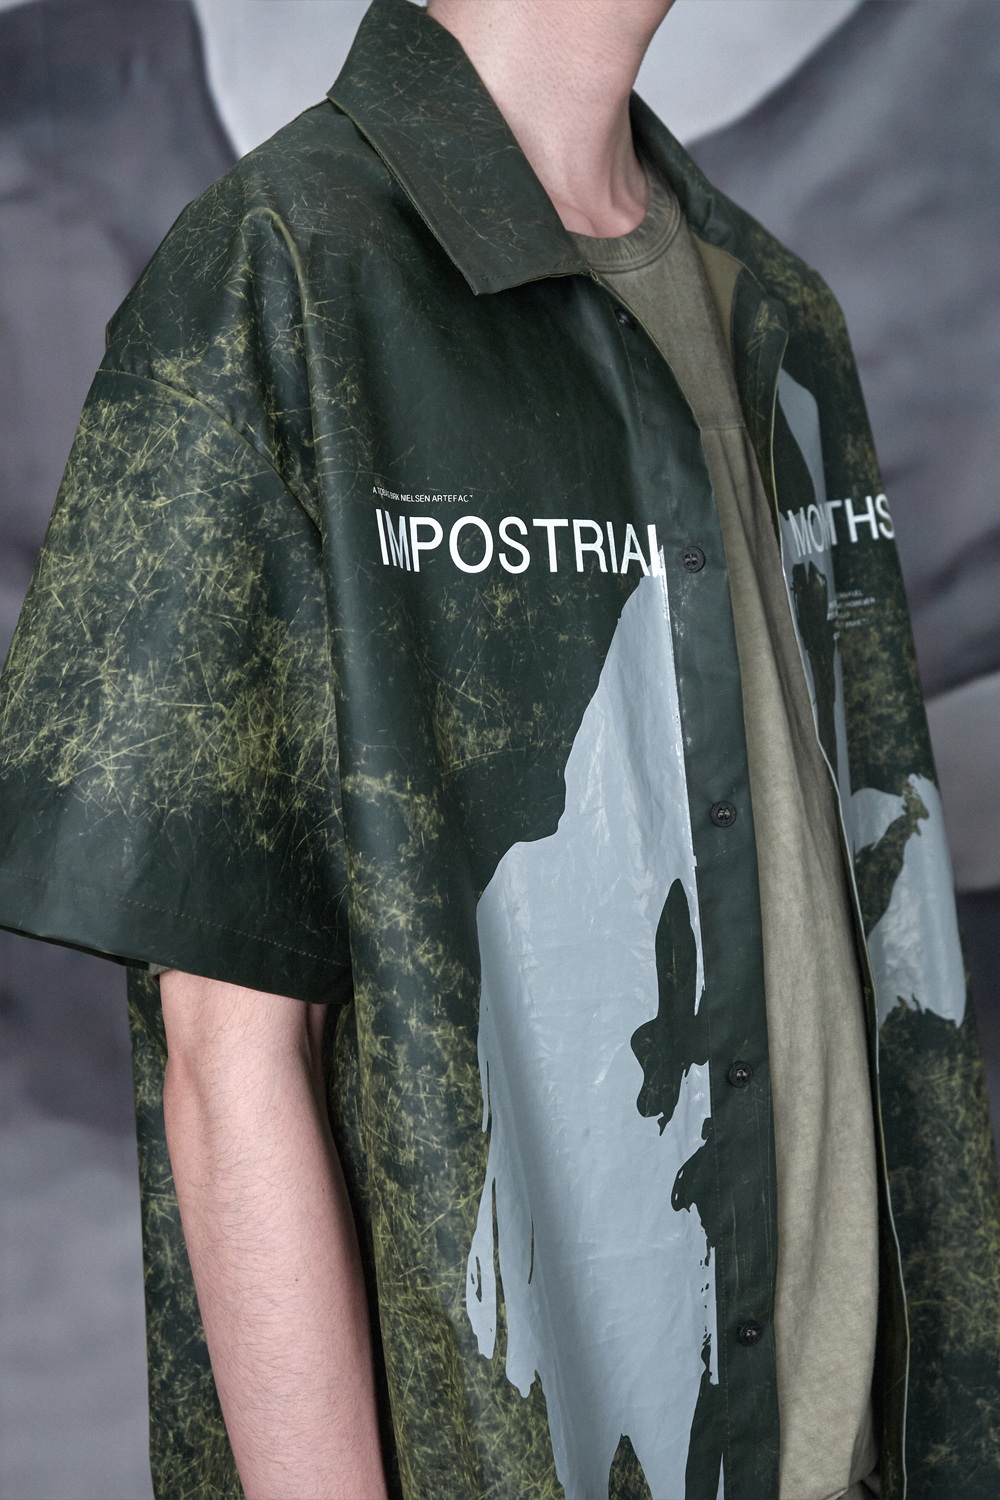 Buy the Iso Poetism Pilla S/S Shirt W/ Serigraphy Print Khaki at Intro. Spend £50 for free UK delivery. Official stockists. We ship worldwide.